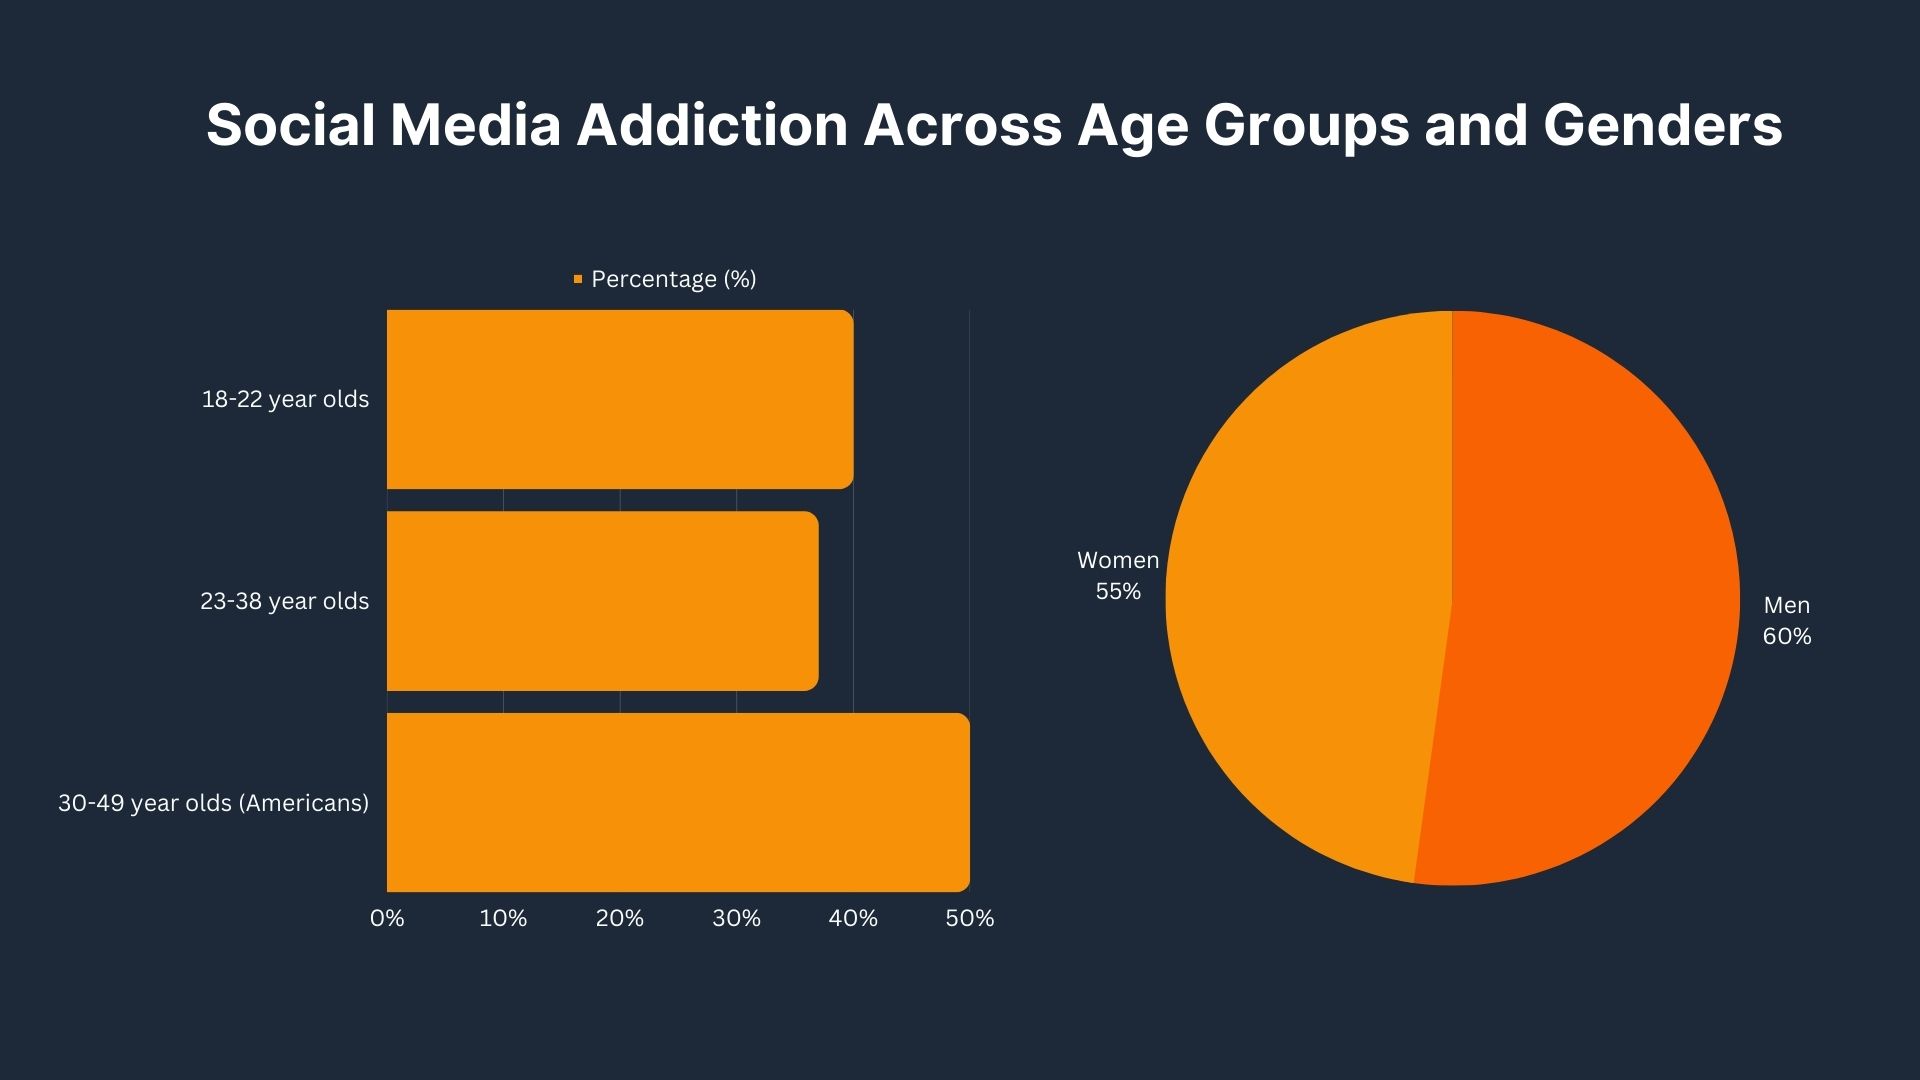 Social Media Addiction Across Age Groups and Genders